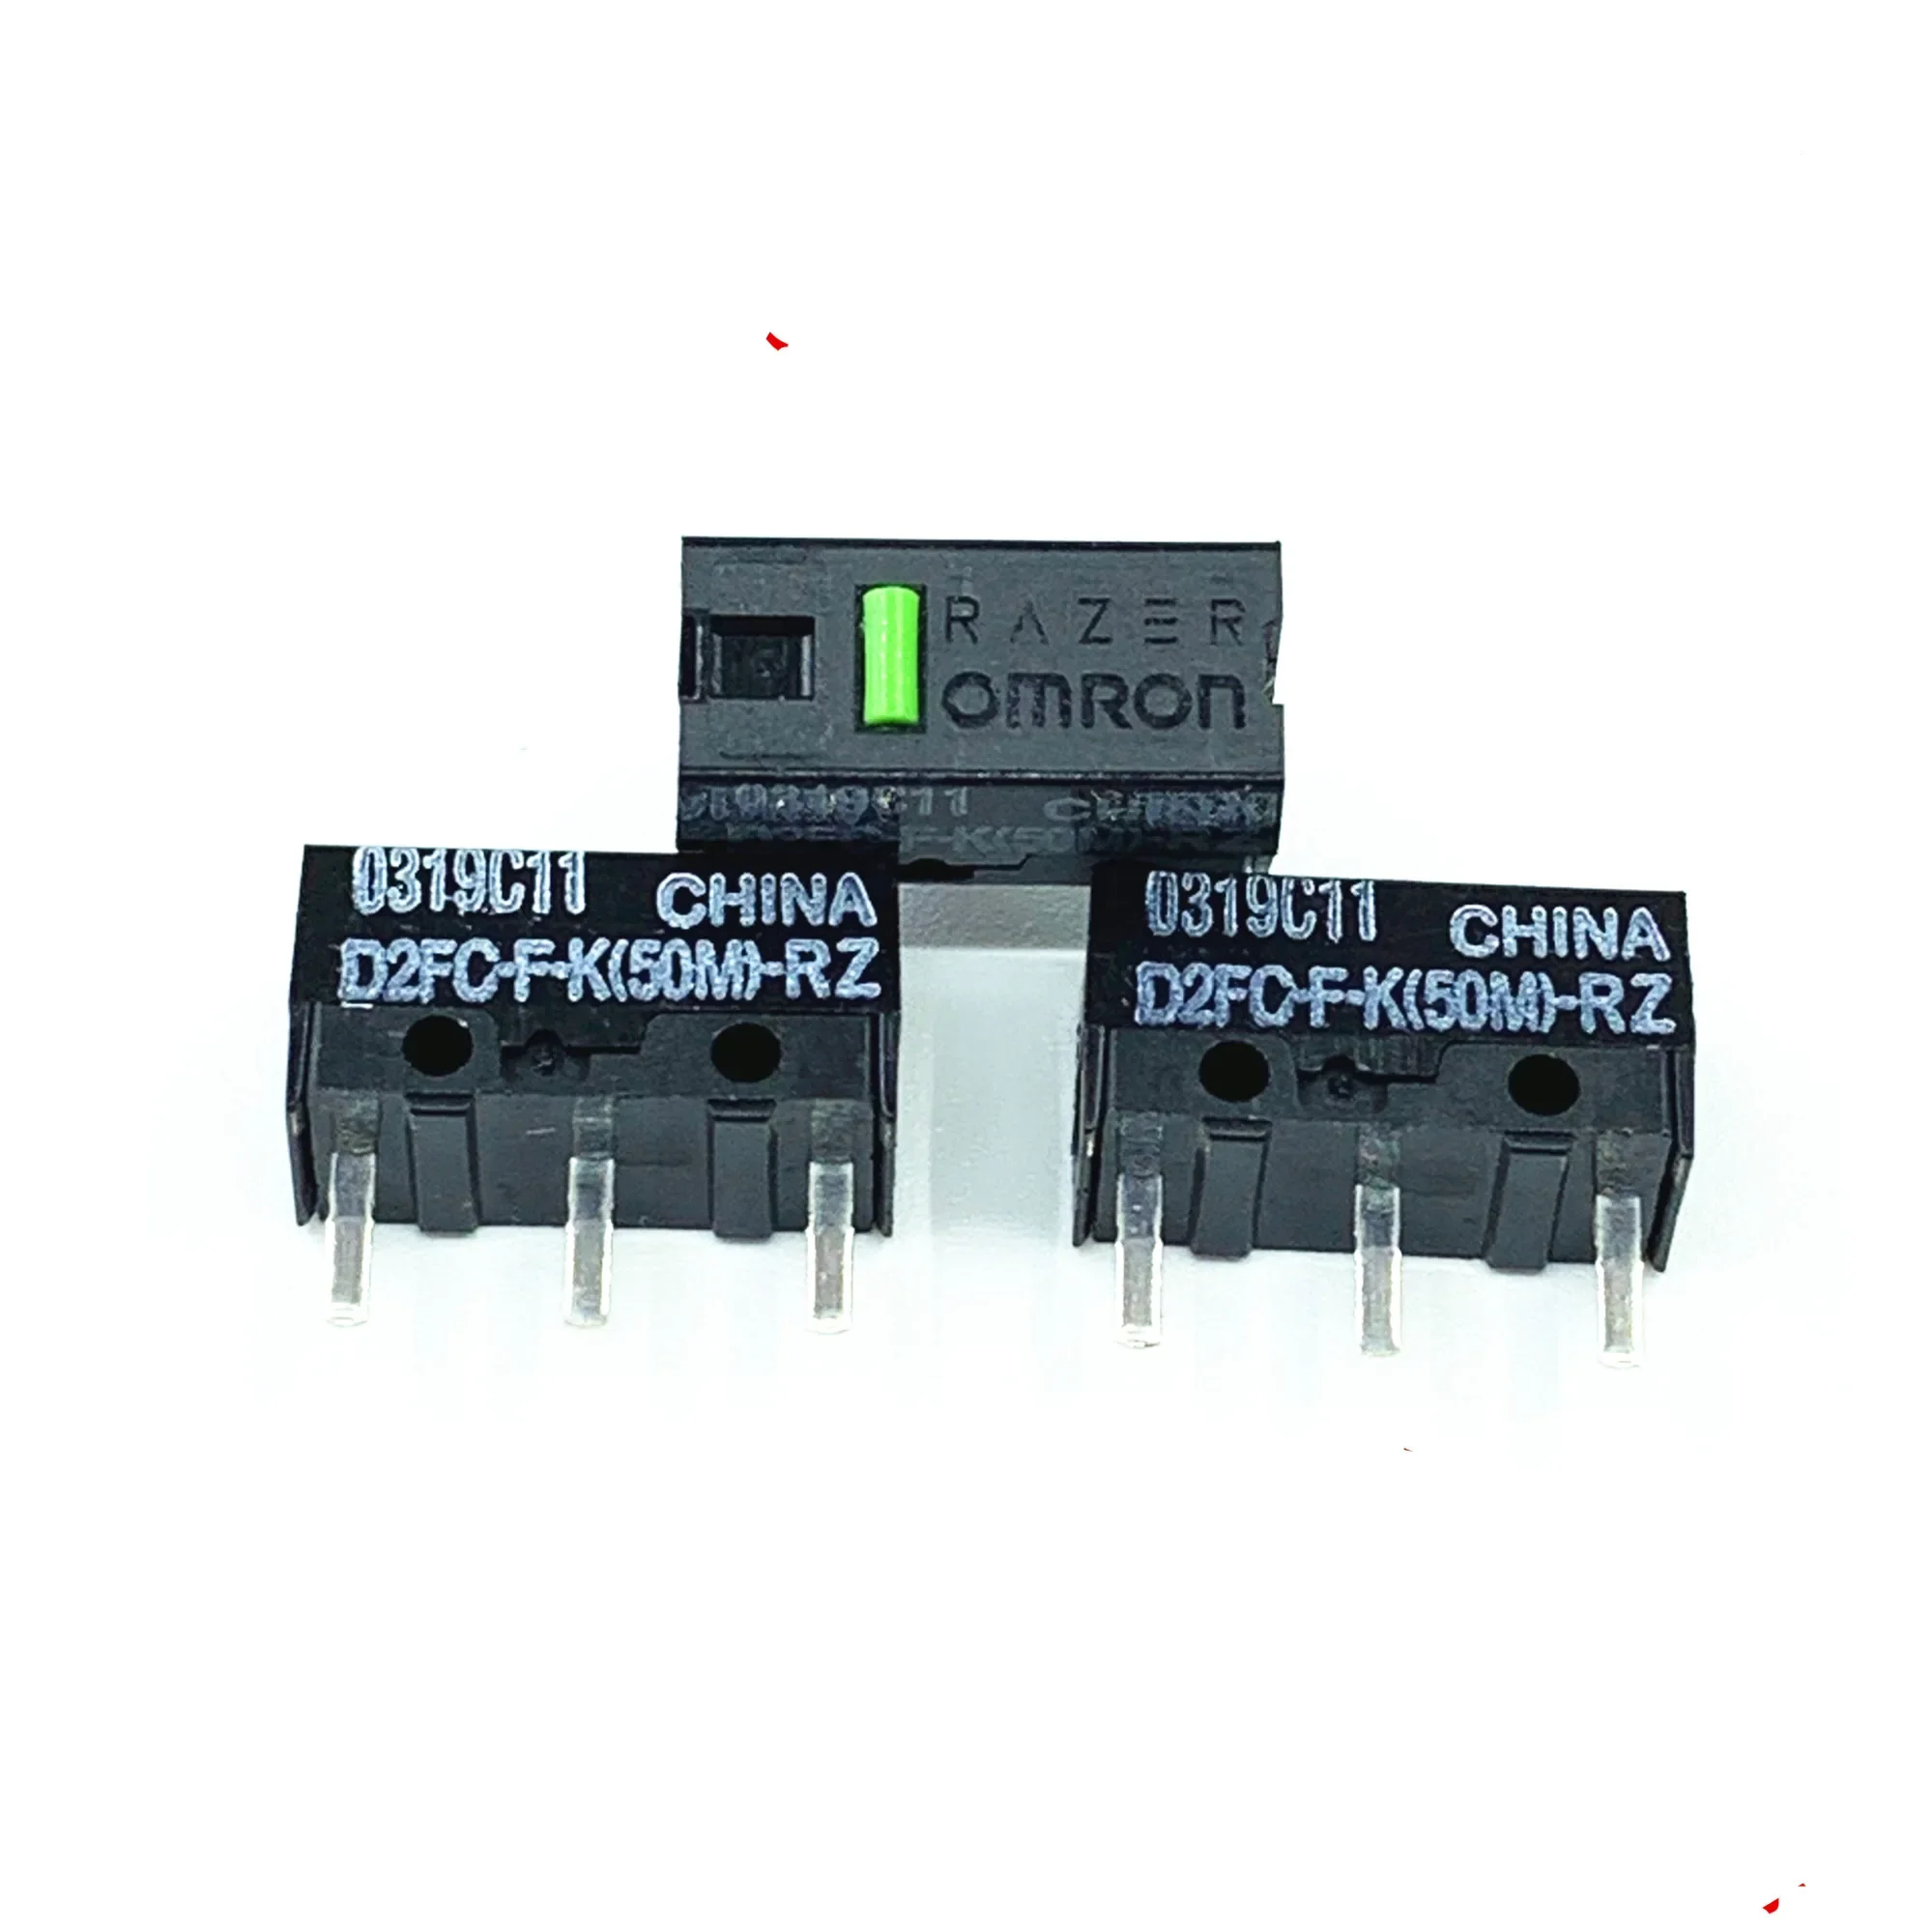 

1 Pieces New original D2FC-F-K (50M) -RZ green point mouse micro switch